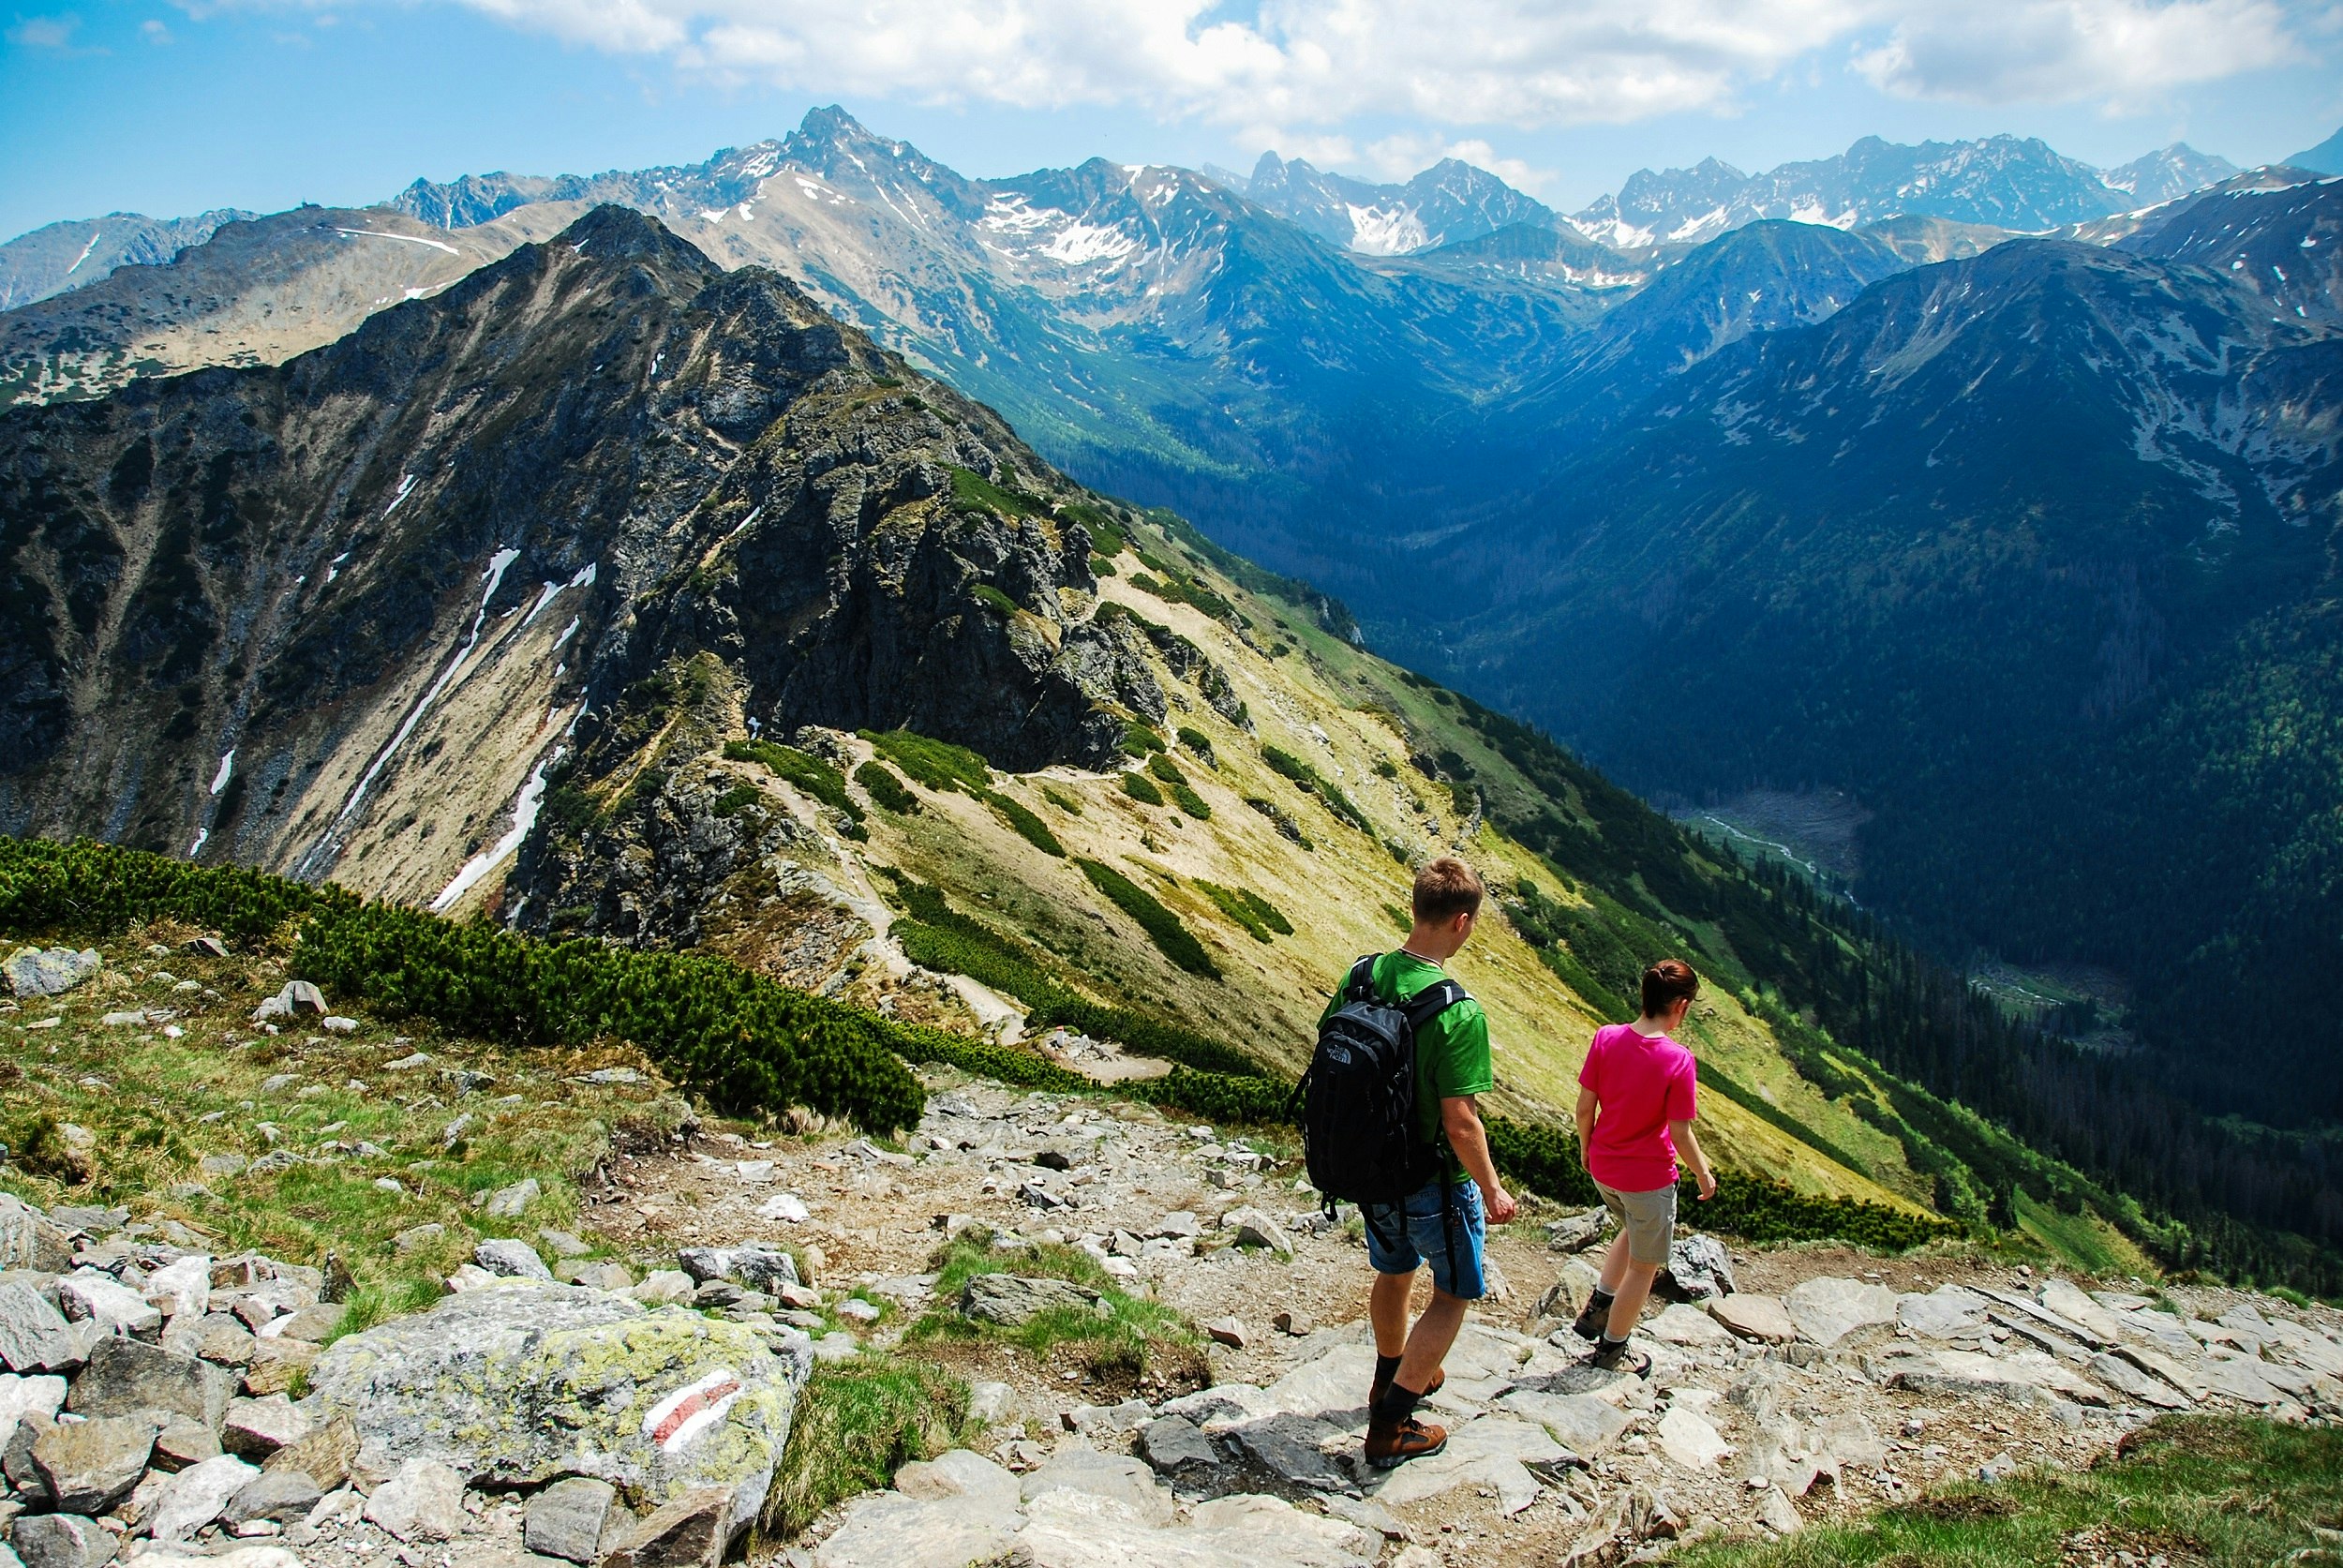 Two hikers dressed in summer clothes follow a rocky path down a hillside. A mountain range stretches out in the distance